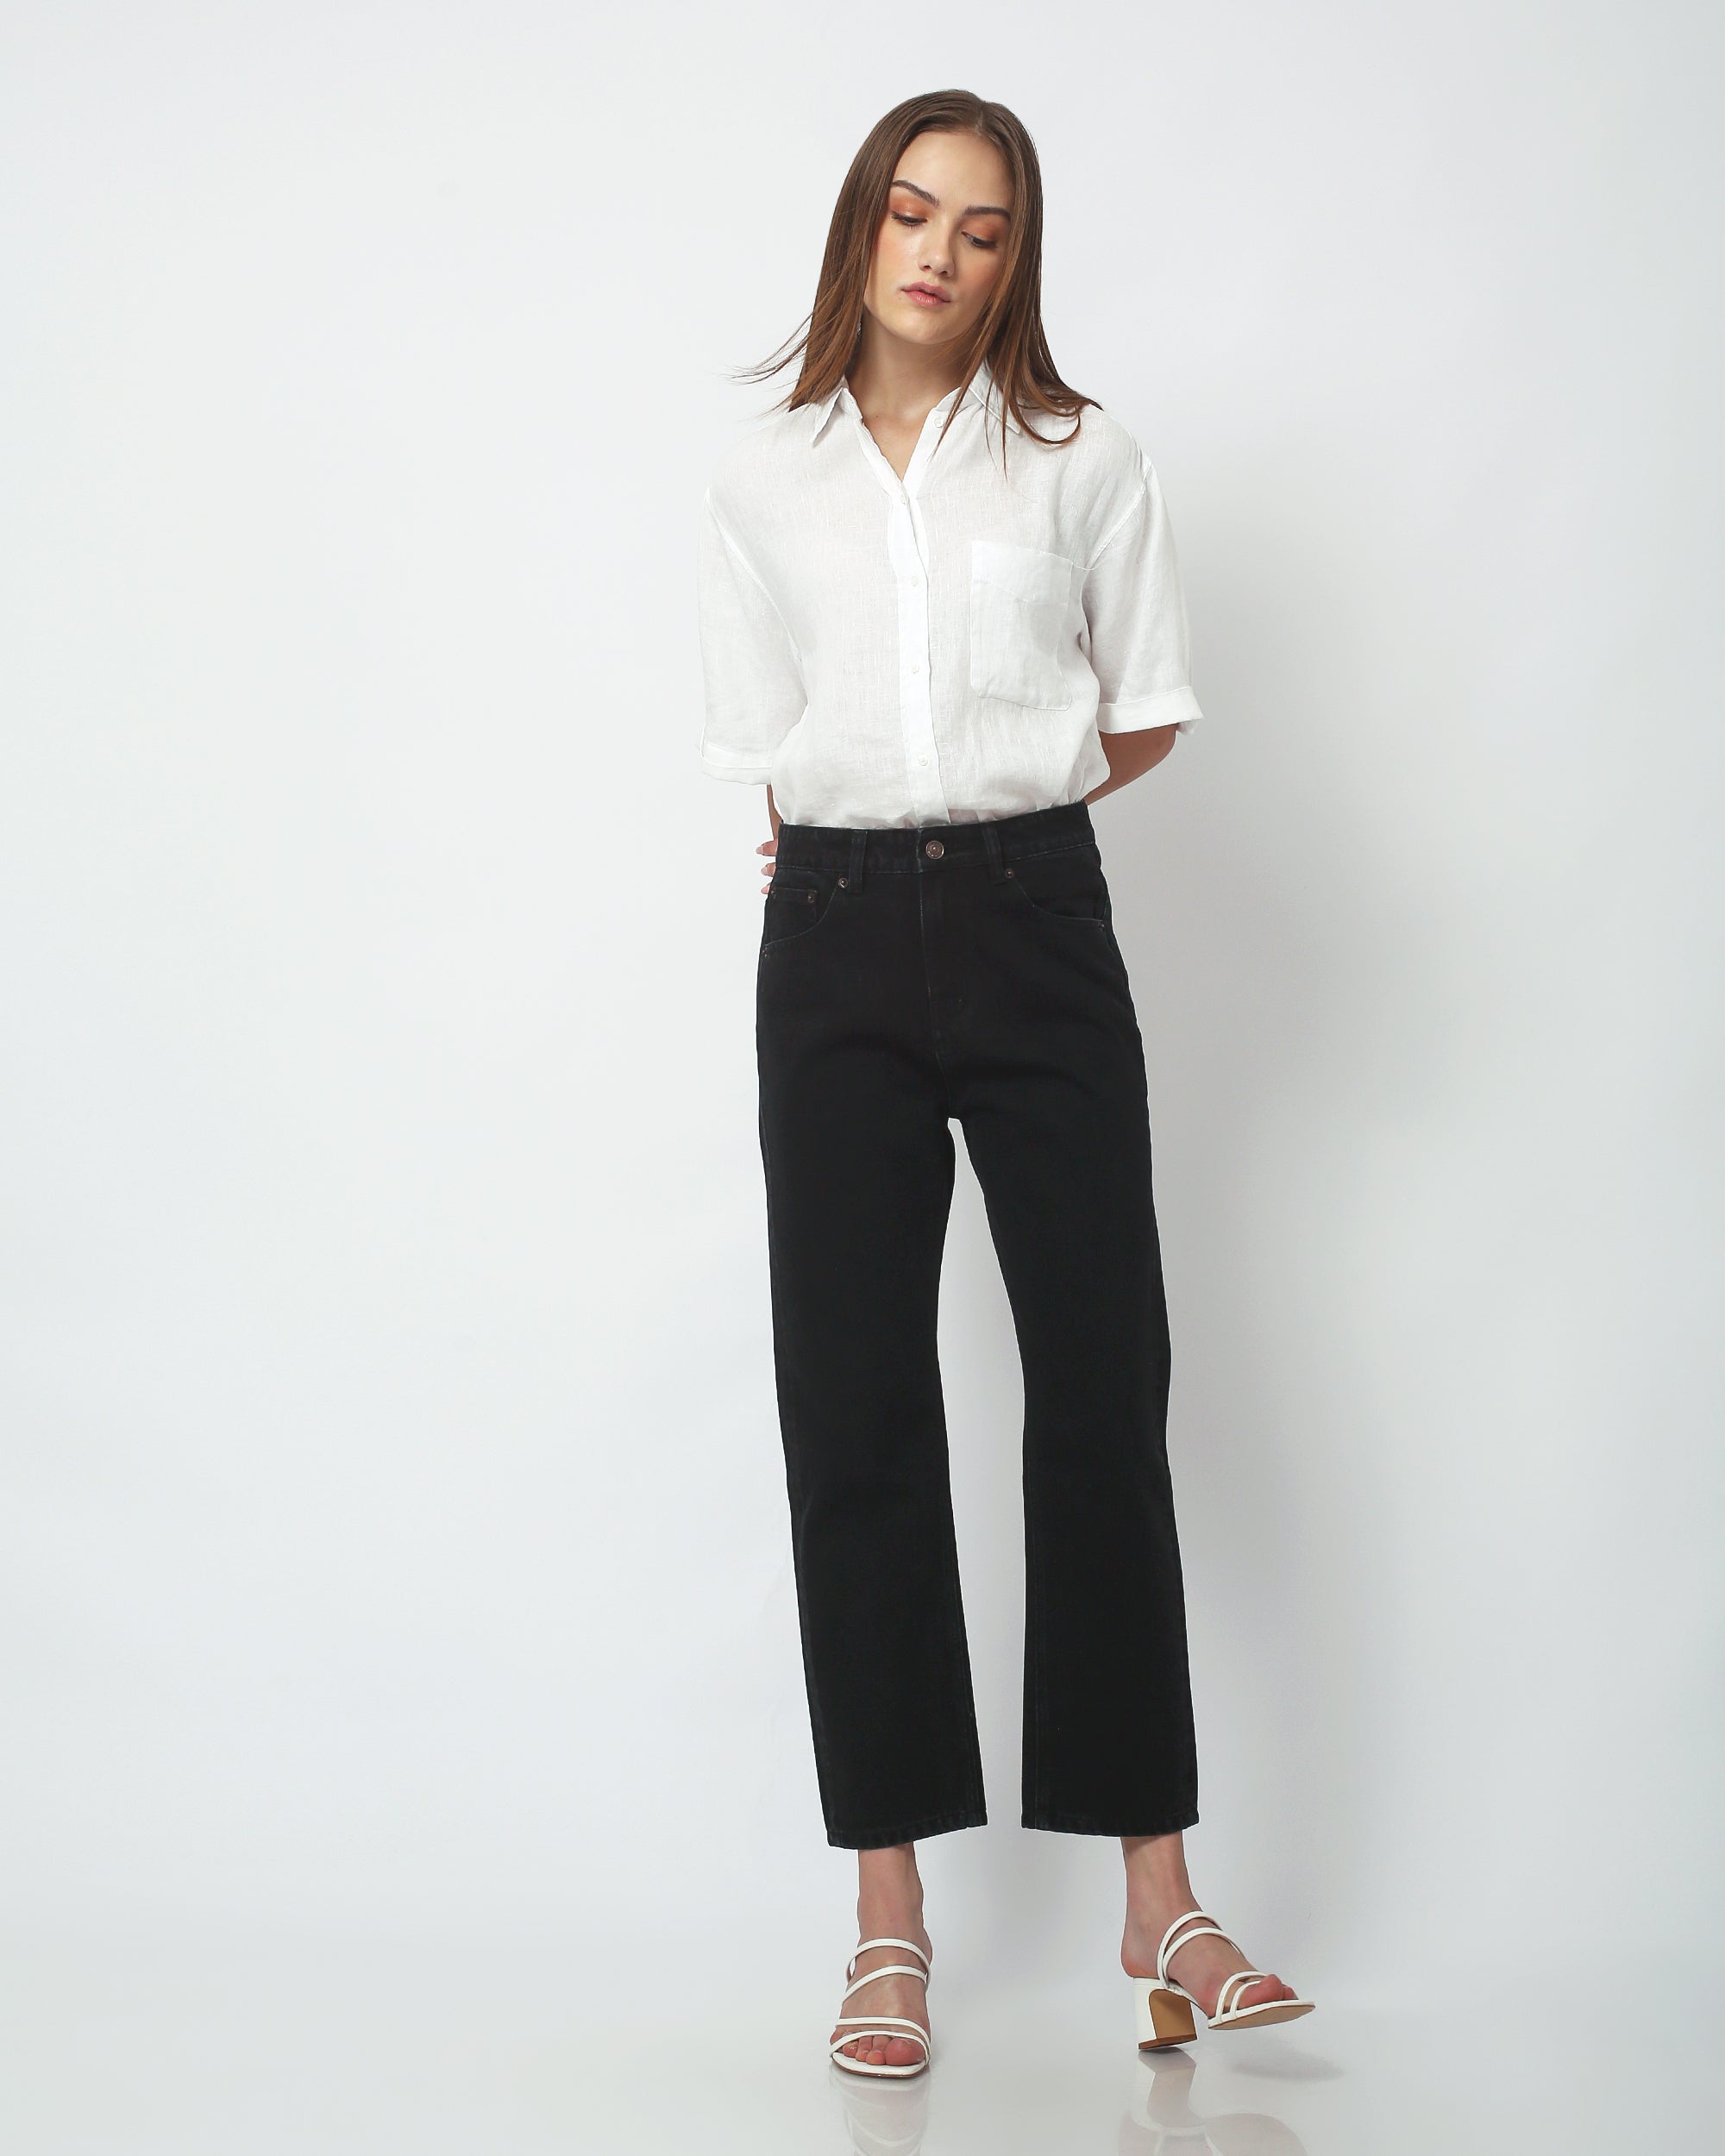 Buy Women's Brown Relaxed Fit Trousers Online at Bewakoof